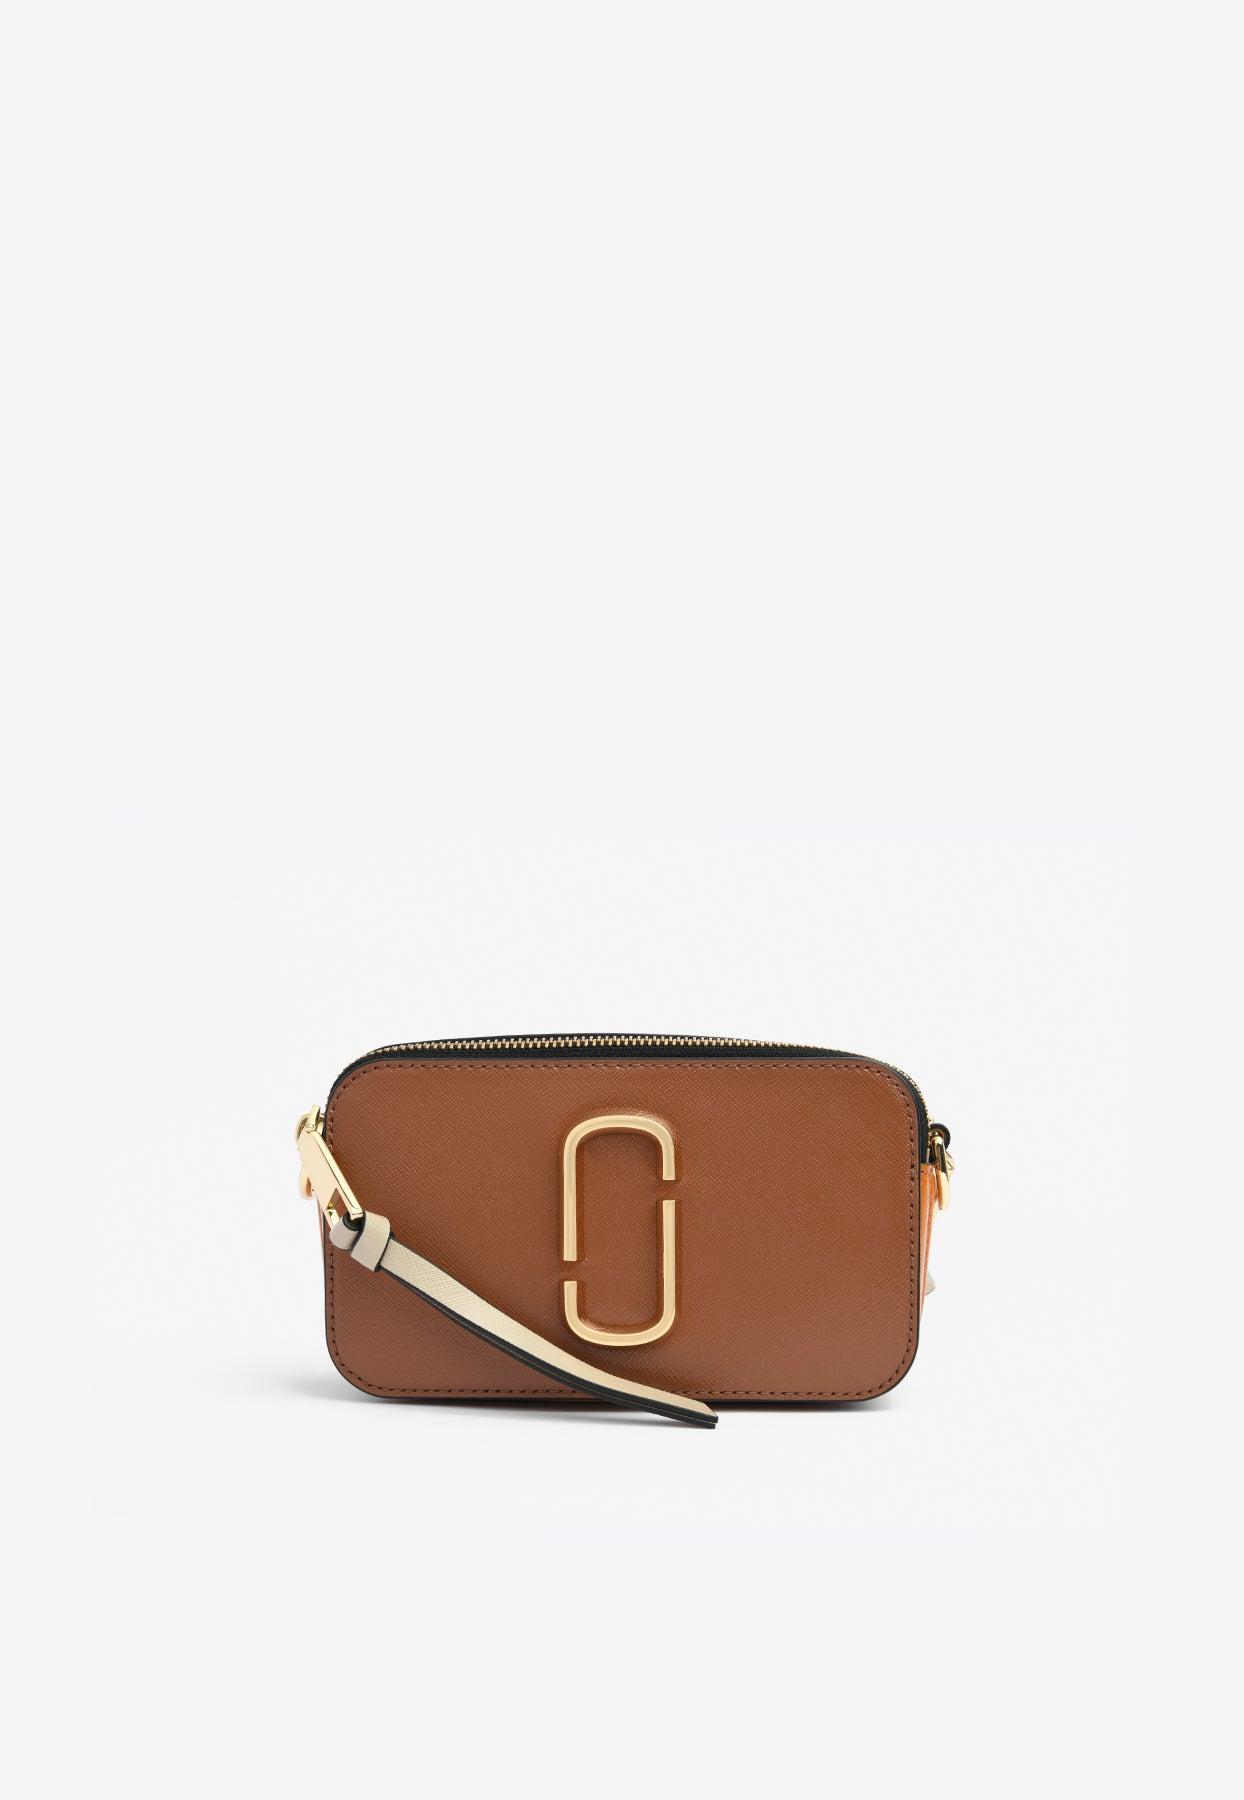 Marc Jacobs The Snapshot Saffiano leather bag